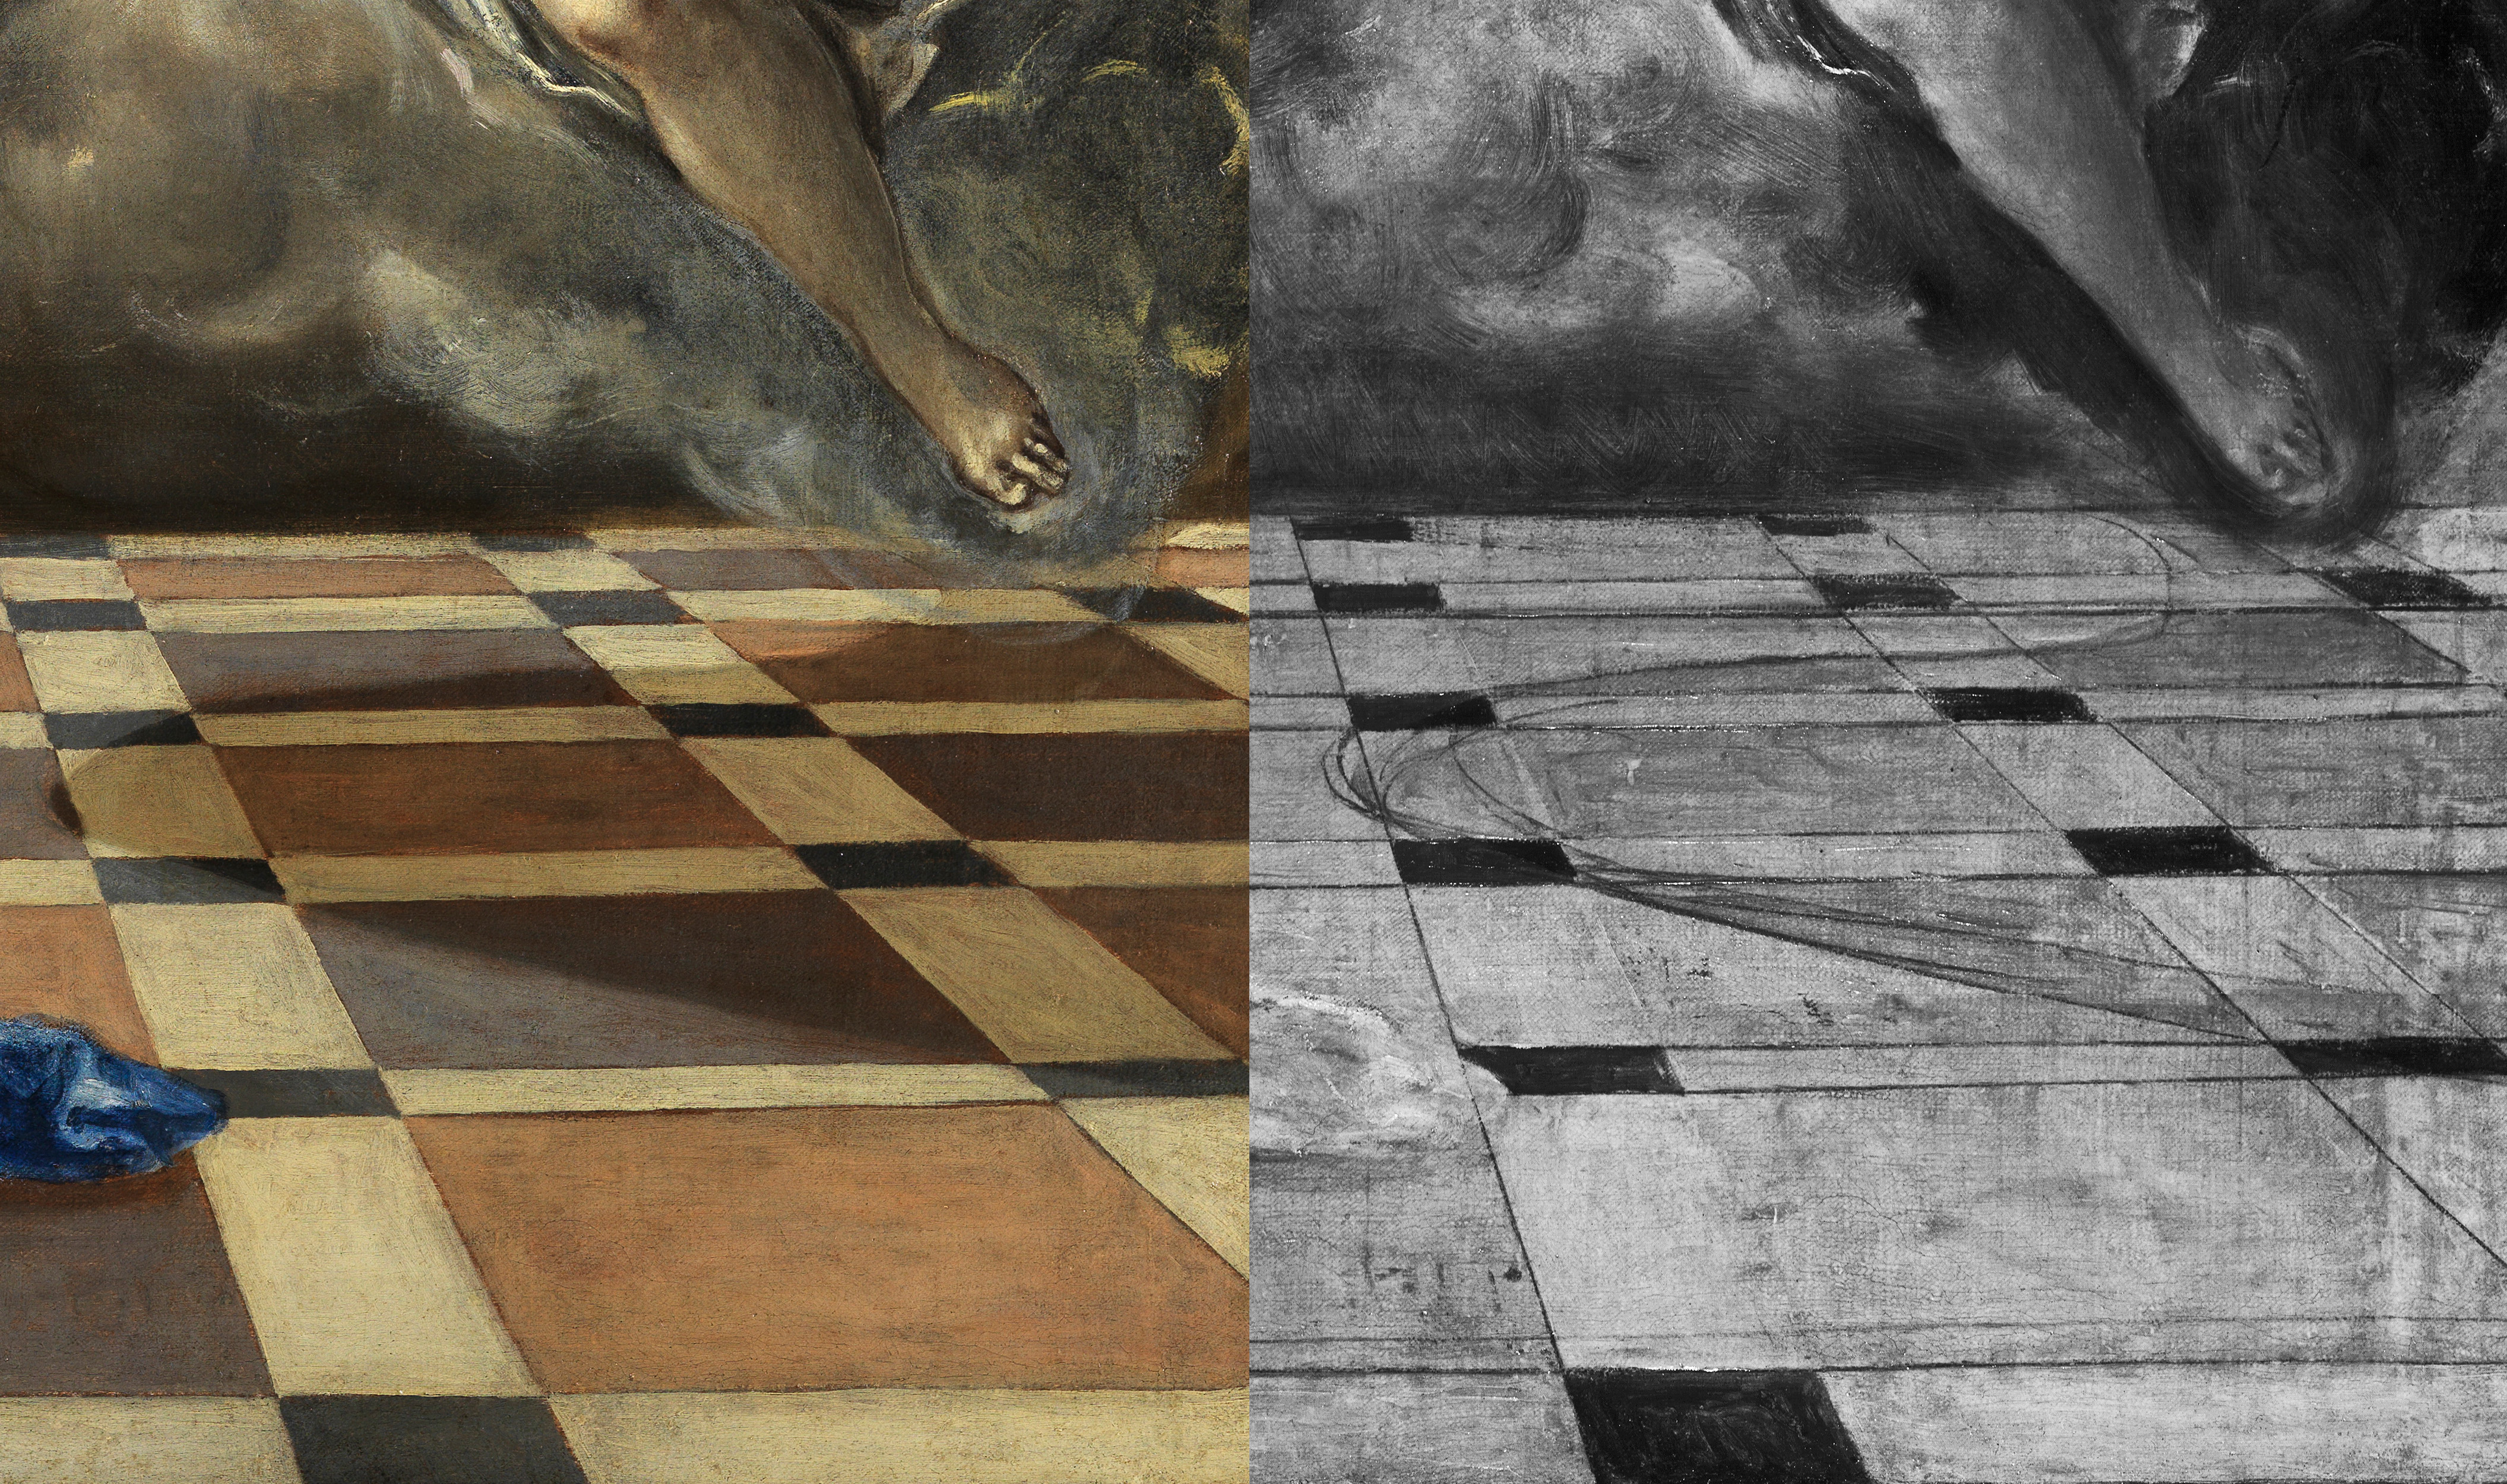 Comparative detail with the infrared image of the painting "The Annunciation" c.1576, by El Greco